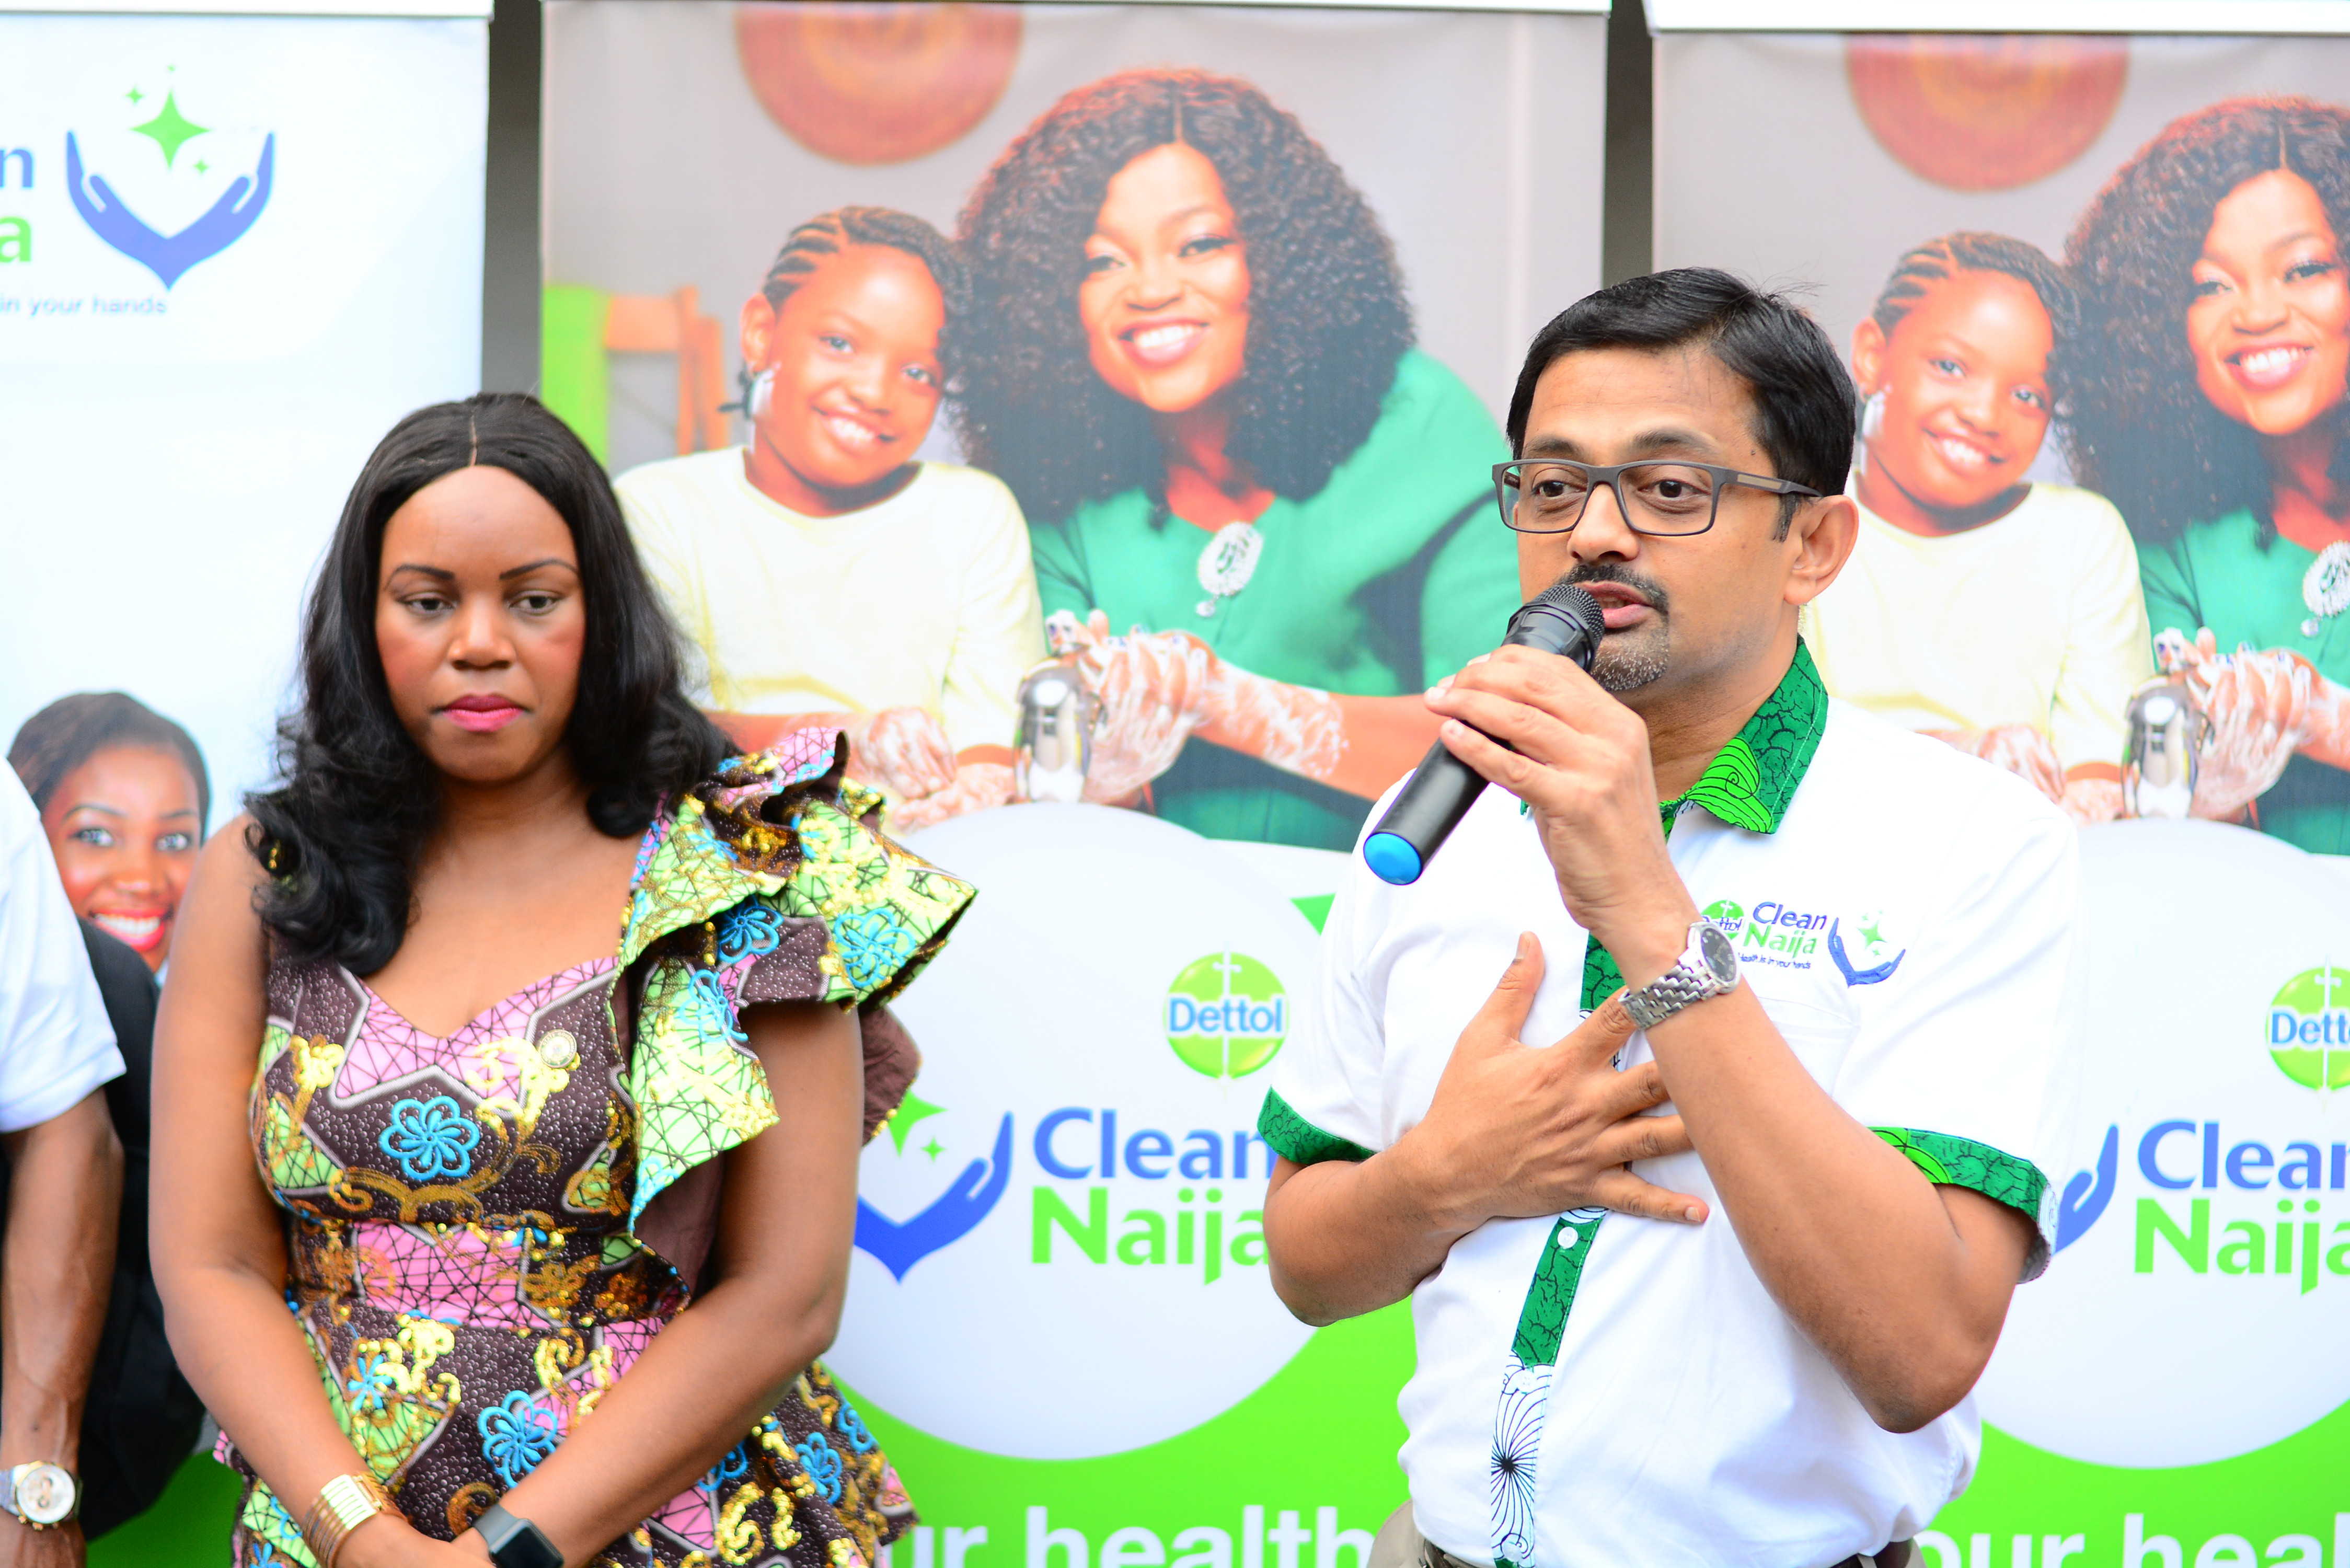 Dettol Partners with Lagos State Office of SDG to Educate 50,000 School Children on Handwashing